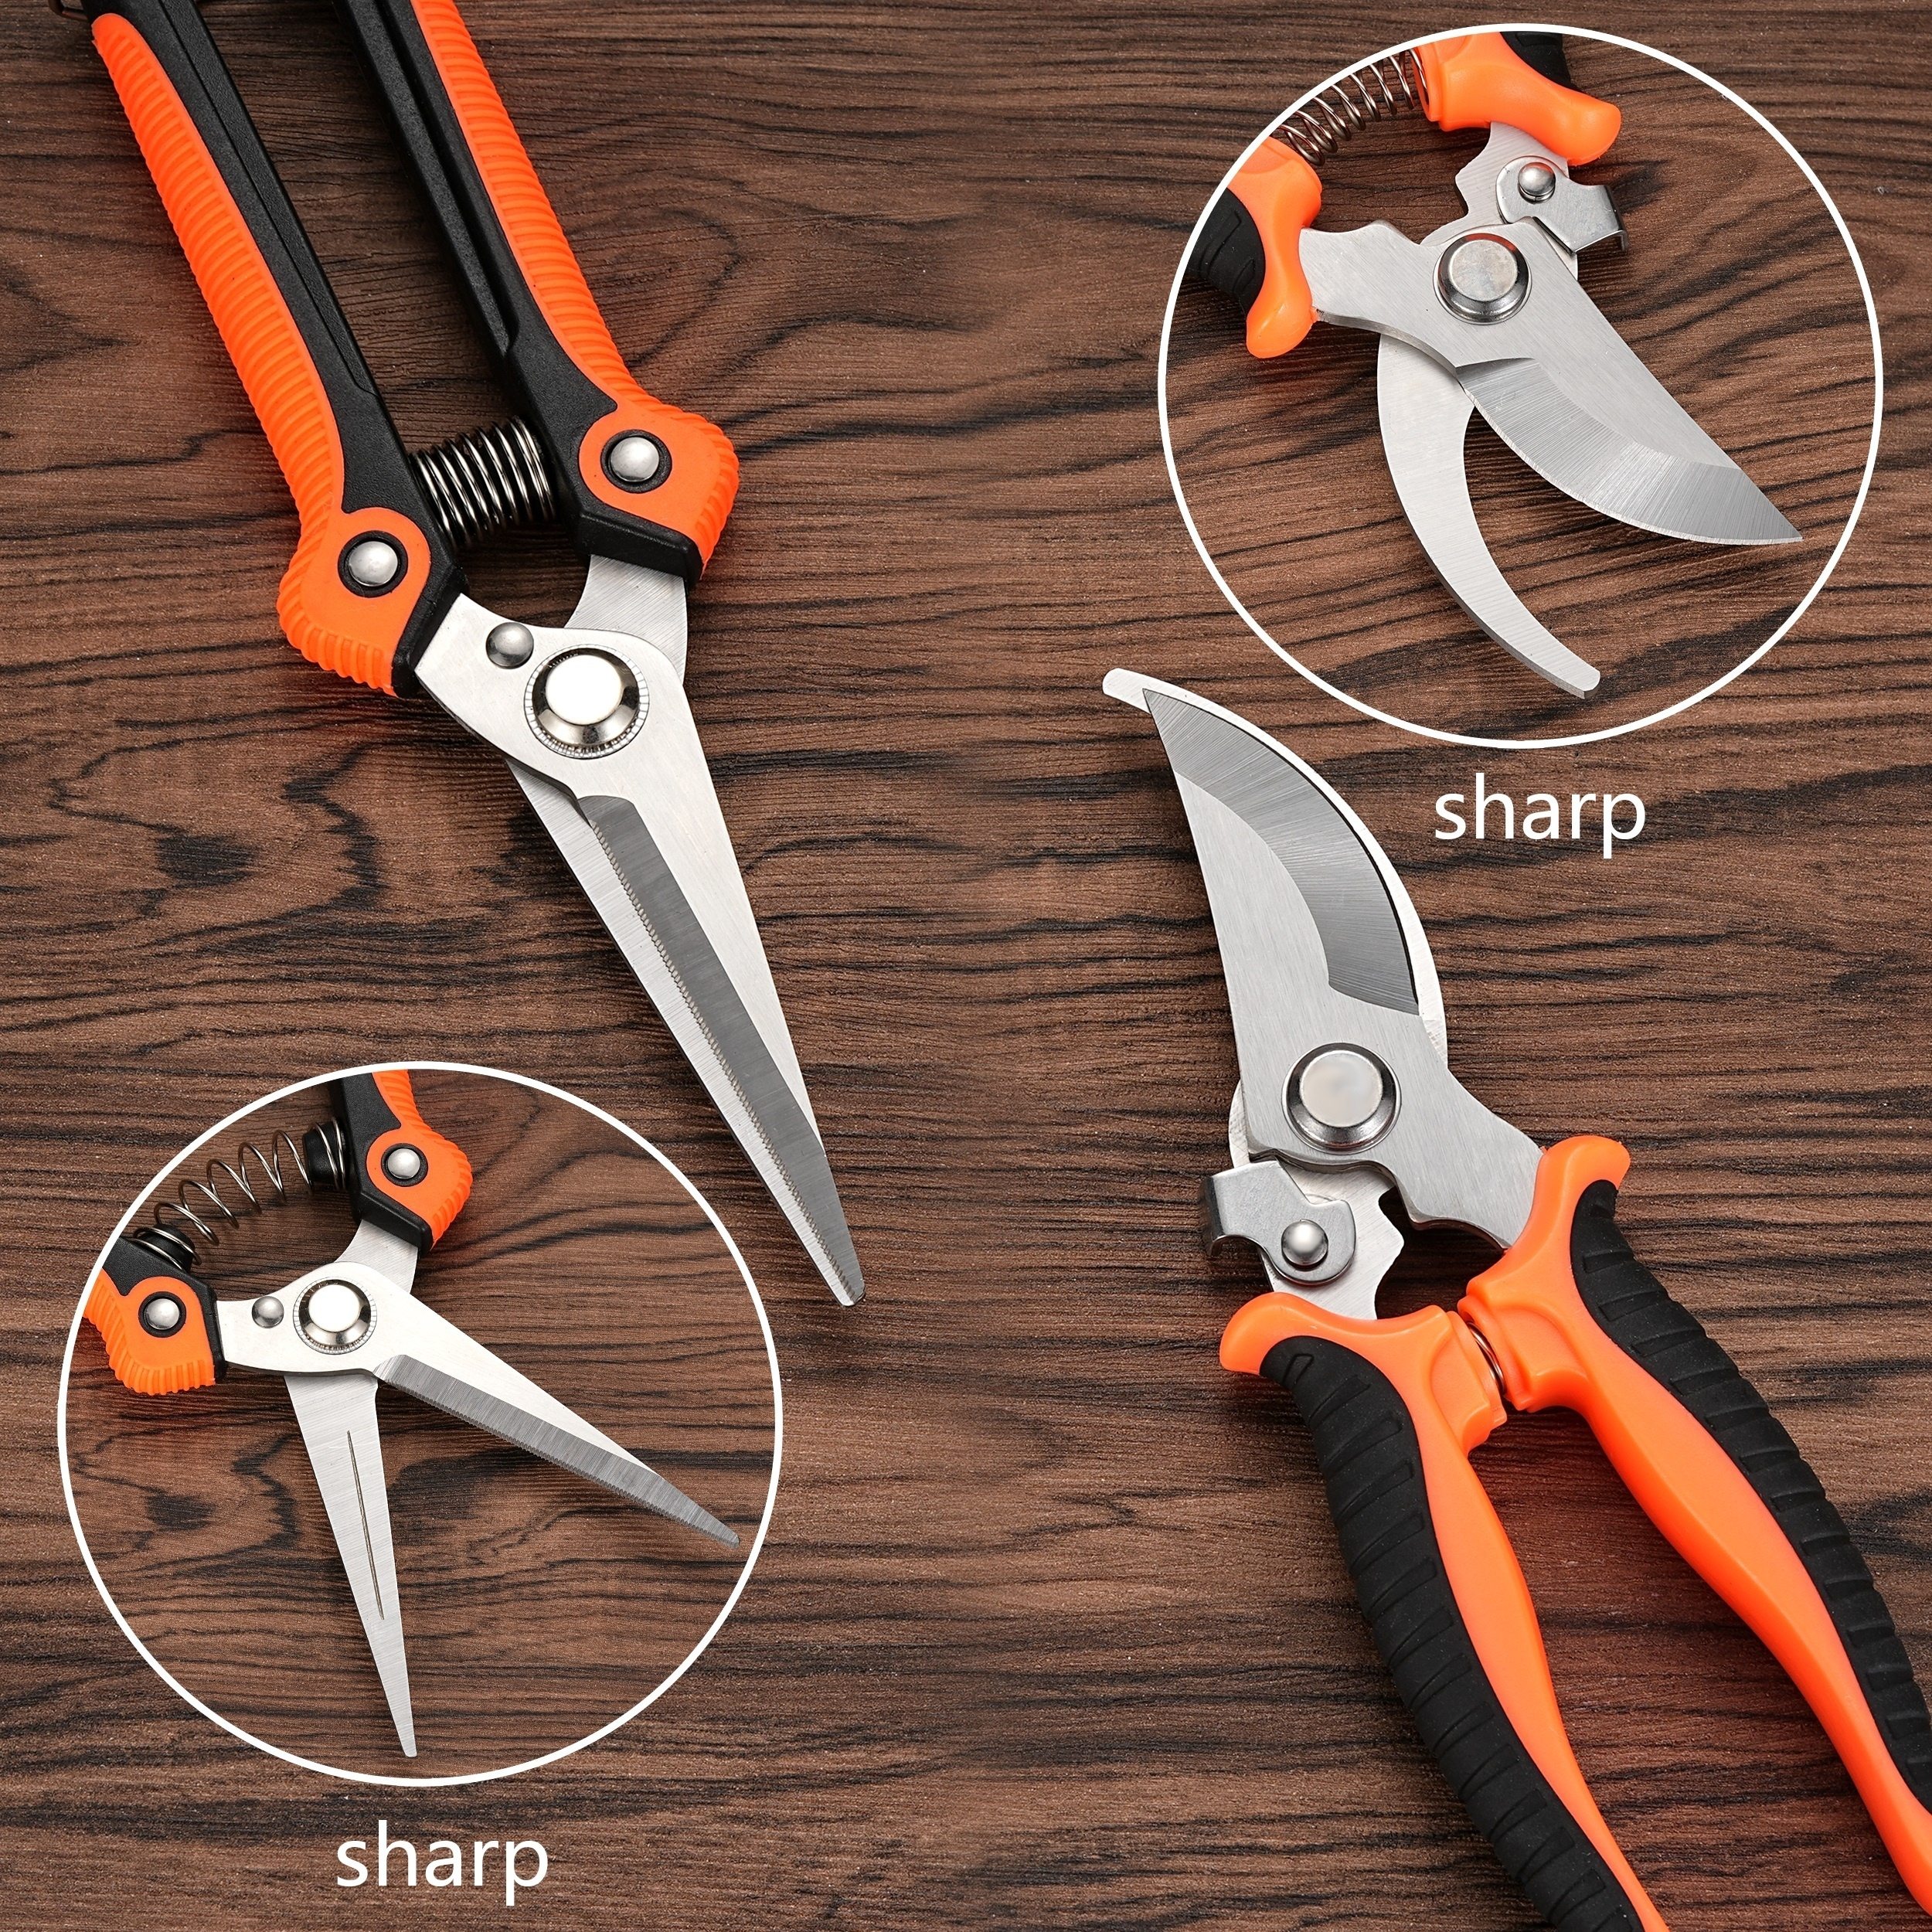 Garden Pruning Shears Stainless Steel Blades, Handheld Scissors Set With  Gardening Gloves,heavy Duty Garden Bypass Pruning Shears,tree Trimmers  Secateurs, Hand Pruner ( ), Soft Cushion Grip Handle Clippers For Plants, Garden  Tools 